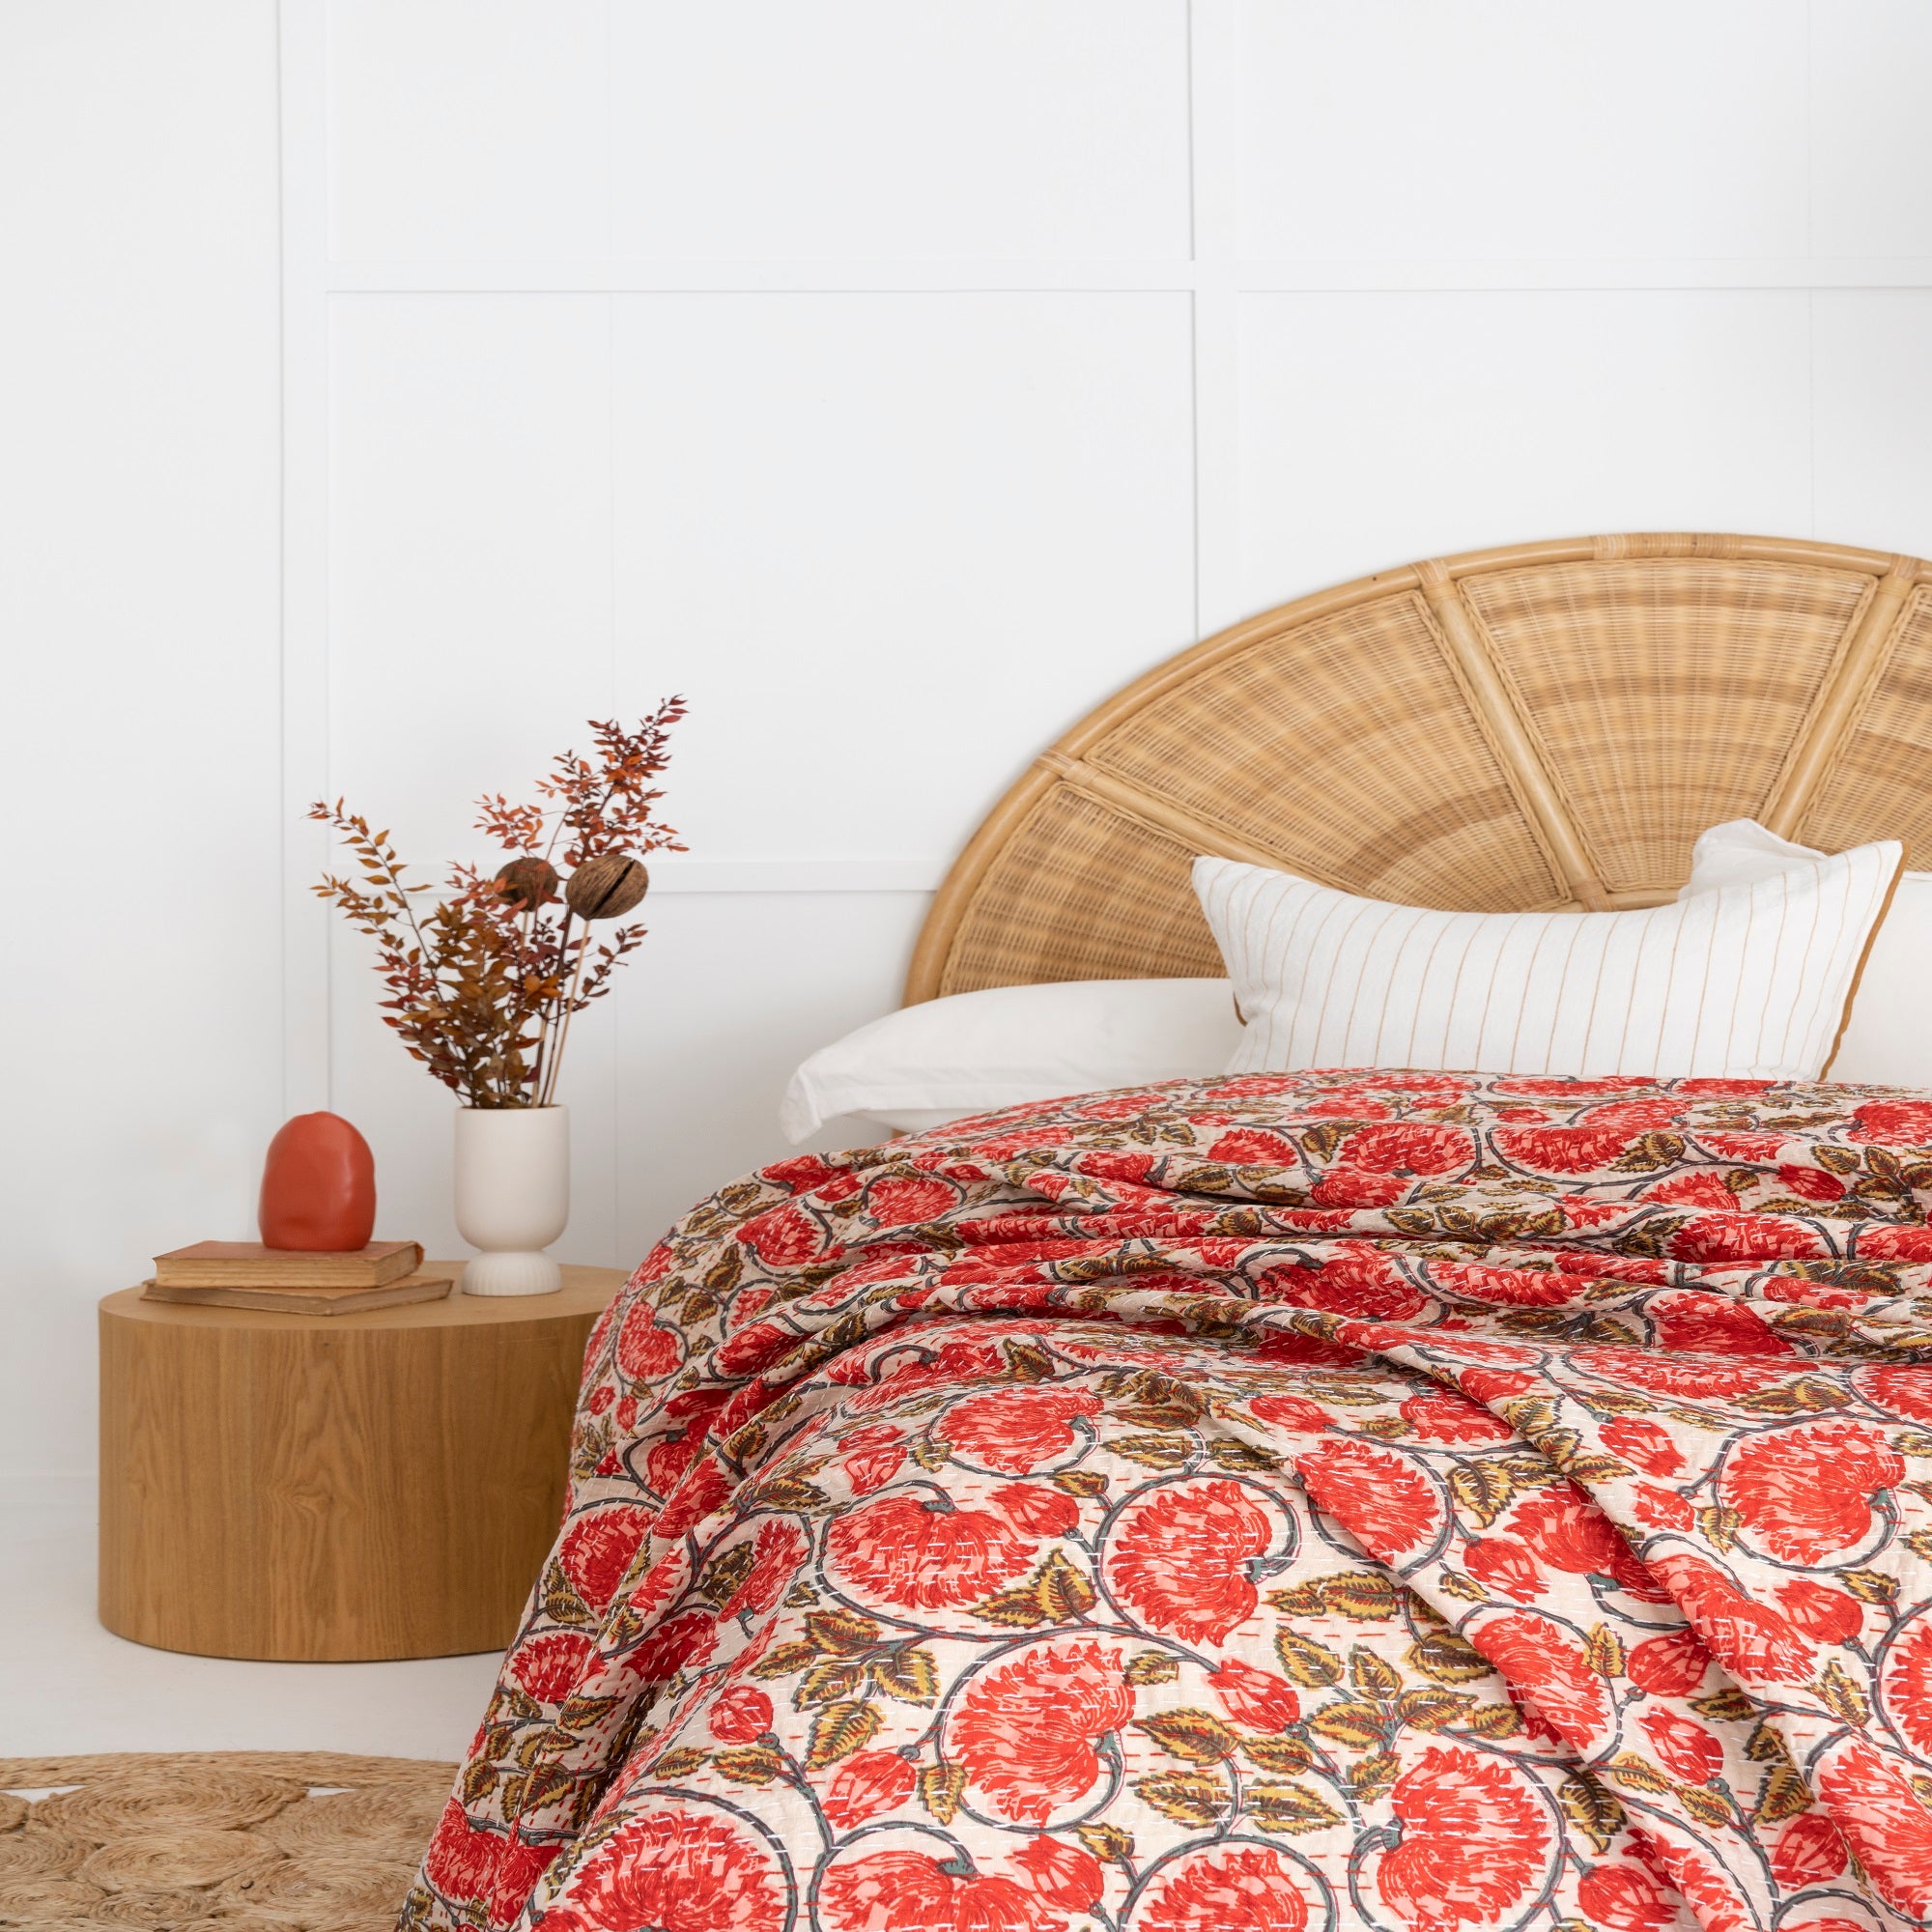 Linen Connections Indian Kantha Quilt - Red Chic